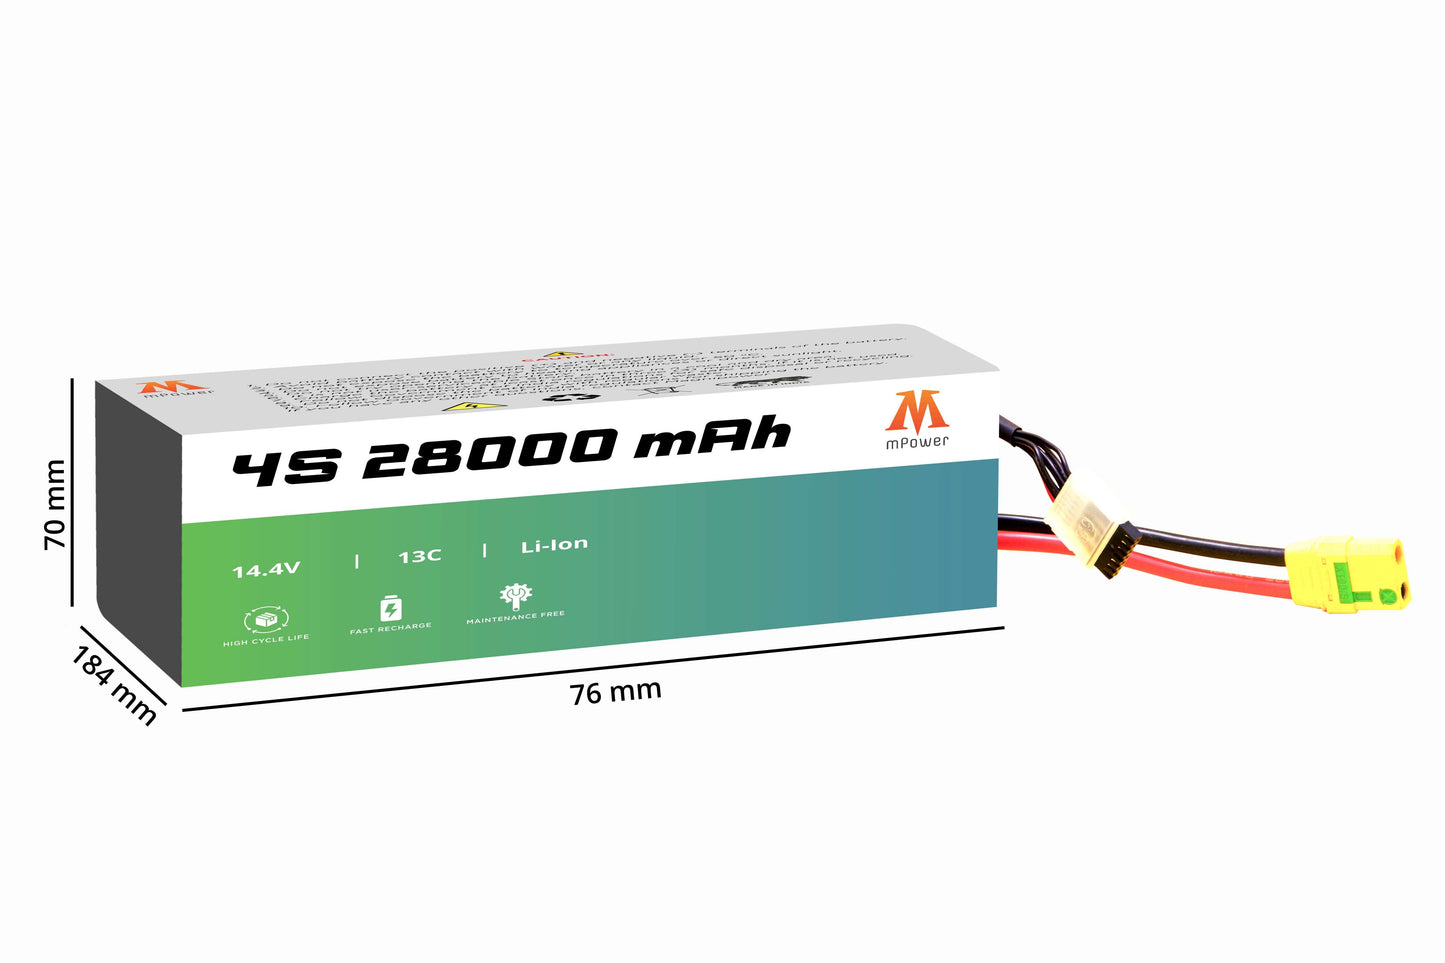 mPower 4S 28000mAh Lithium-Ion Battery for Survey Drones